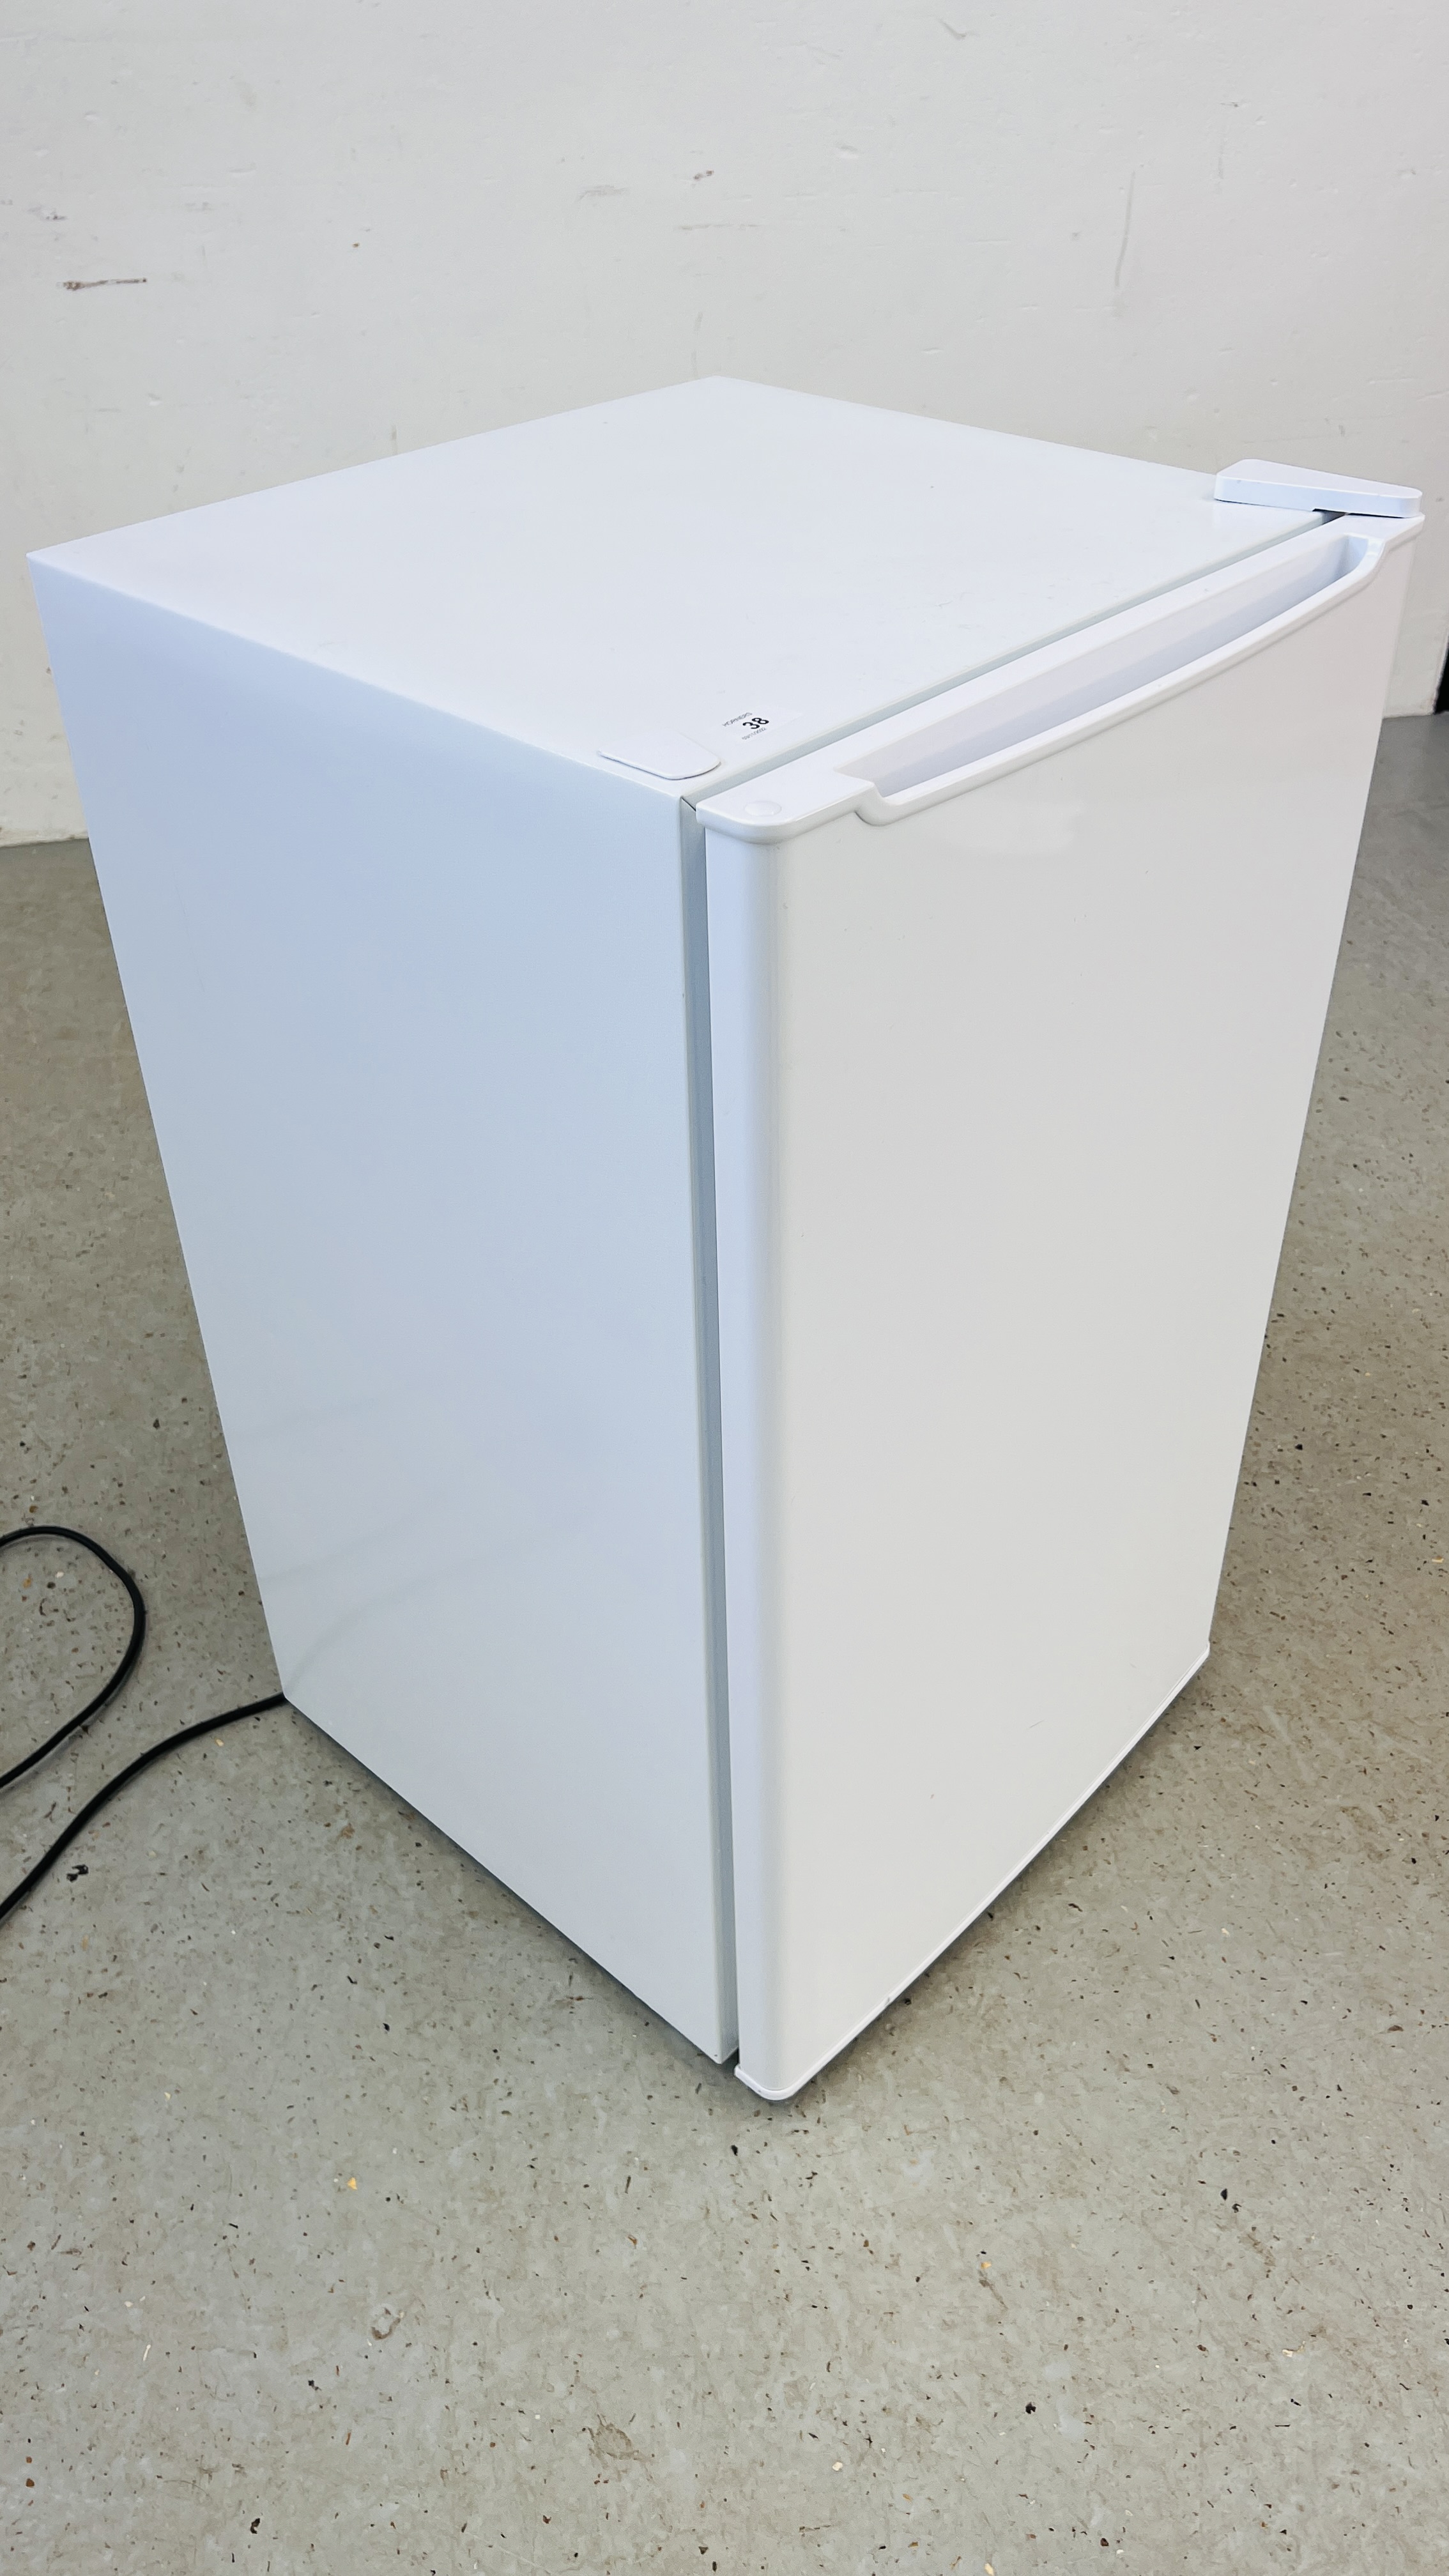 AN UNBRANDED UNDERCOUNTER THREE DRAWER FREEZER - SOLD AS SEEN. - Image 2 of 6